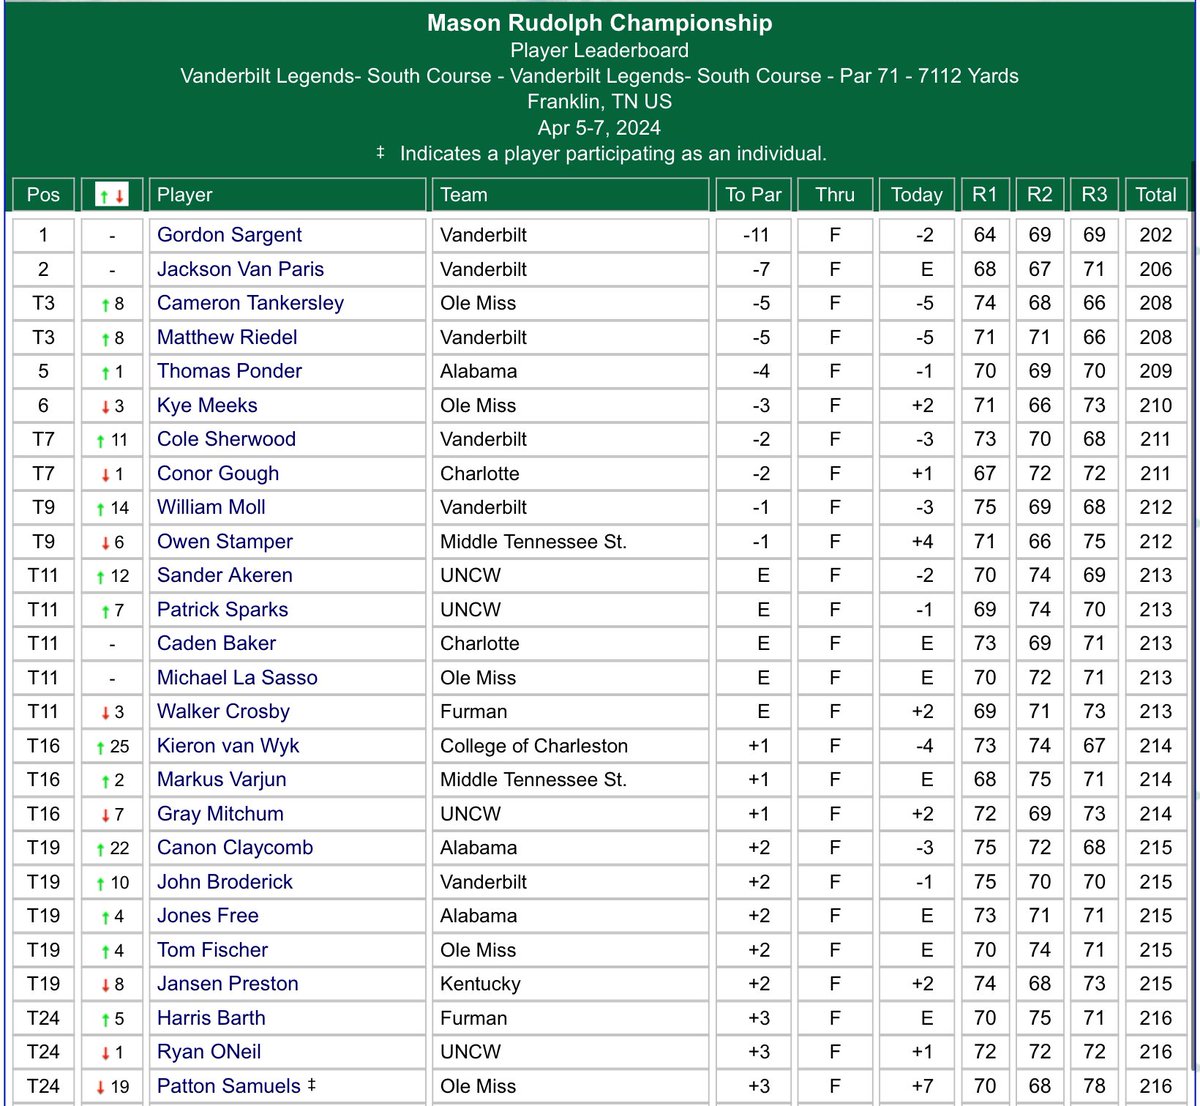 A top 10 finish for @Conorgough4 (-2) at the Mason Rudolph Championship in Tennessee. Results: tinyurl.com/5n6c9fee